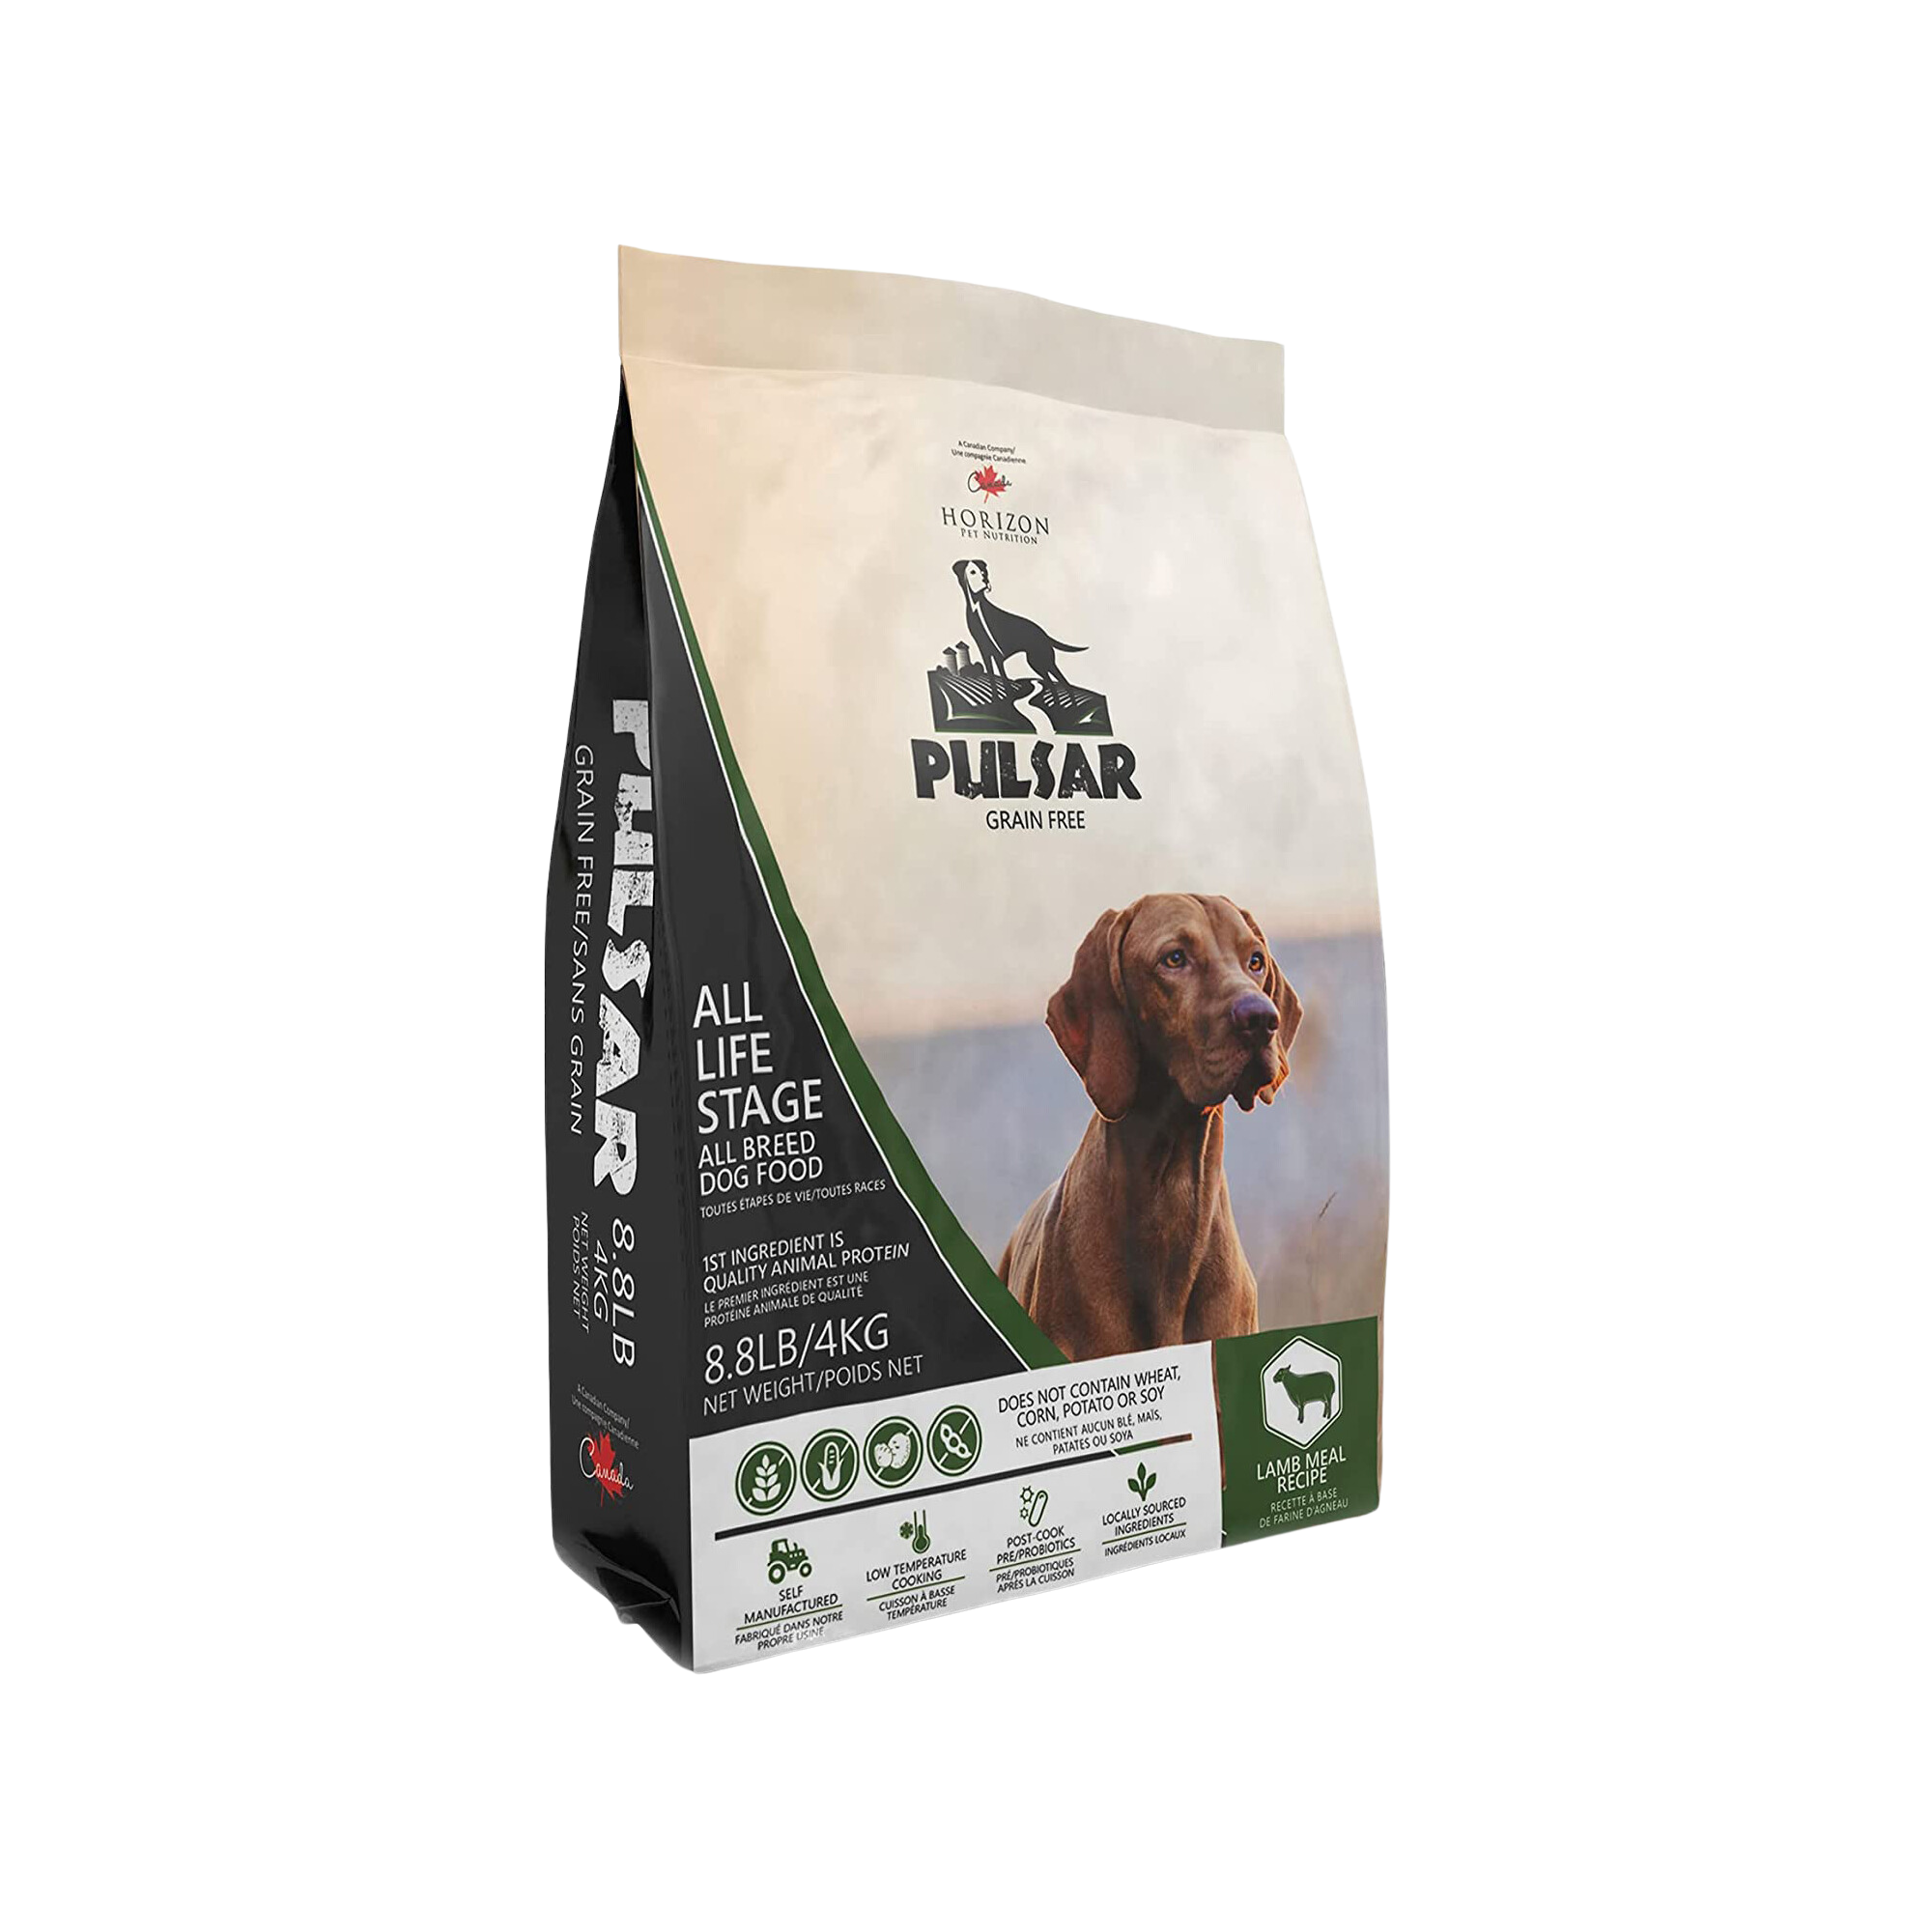 Pulsar All Life Stage, All Breed Dog Food, Grain-Free, Lamb Meal Recipe